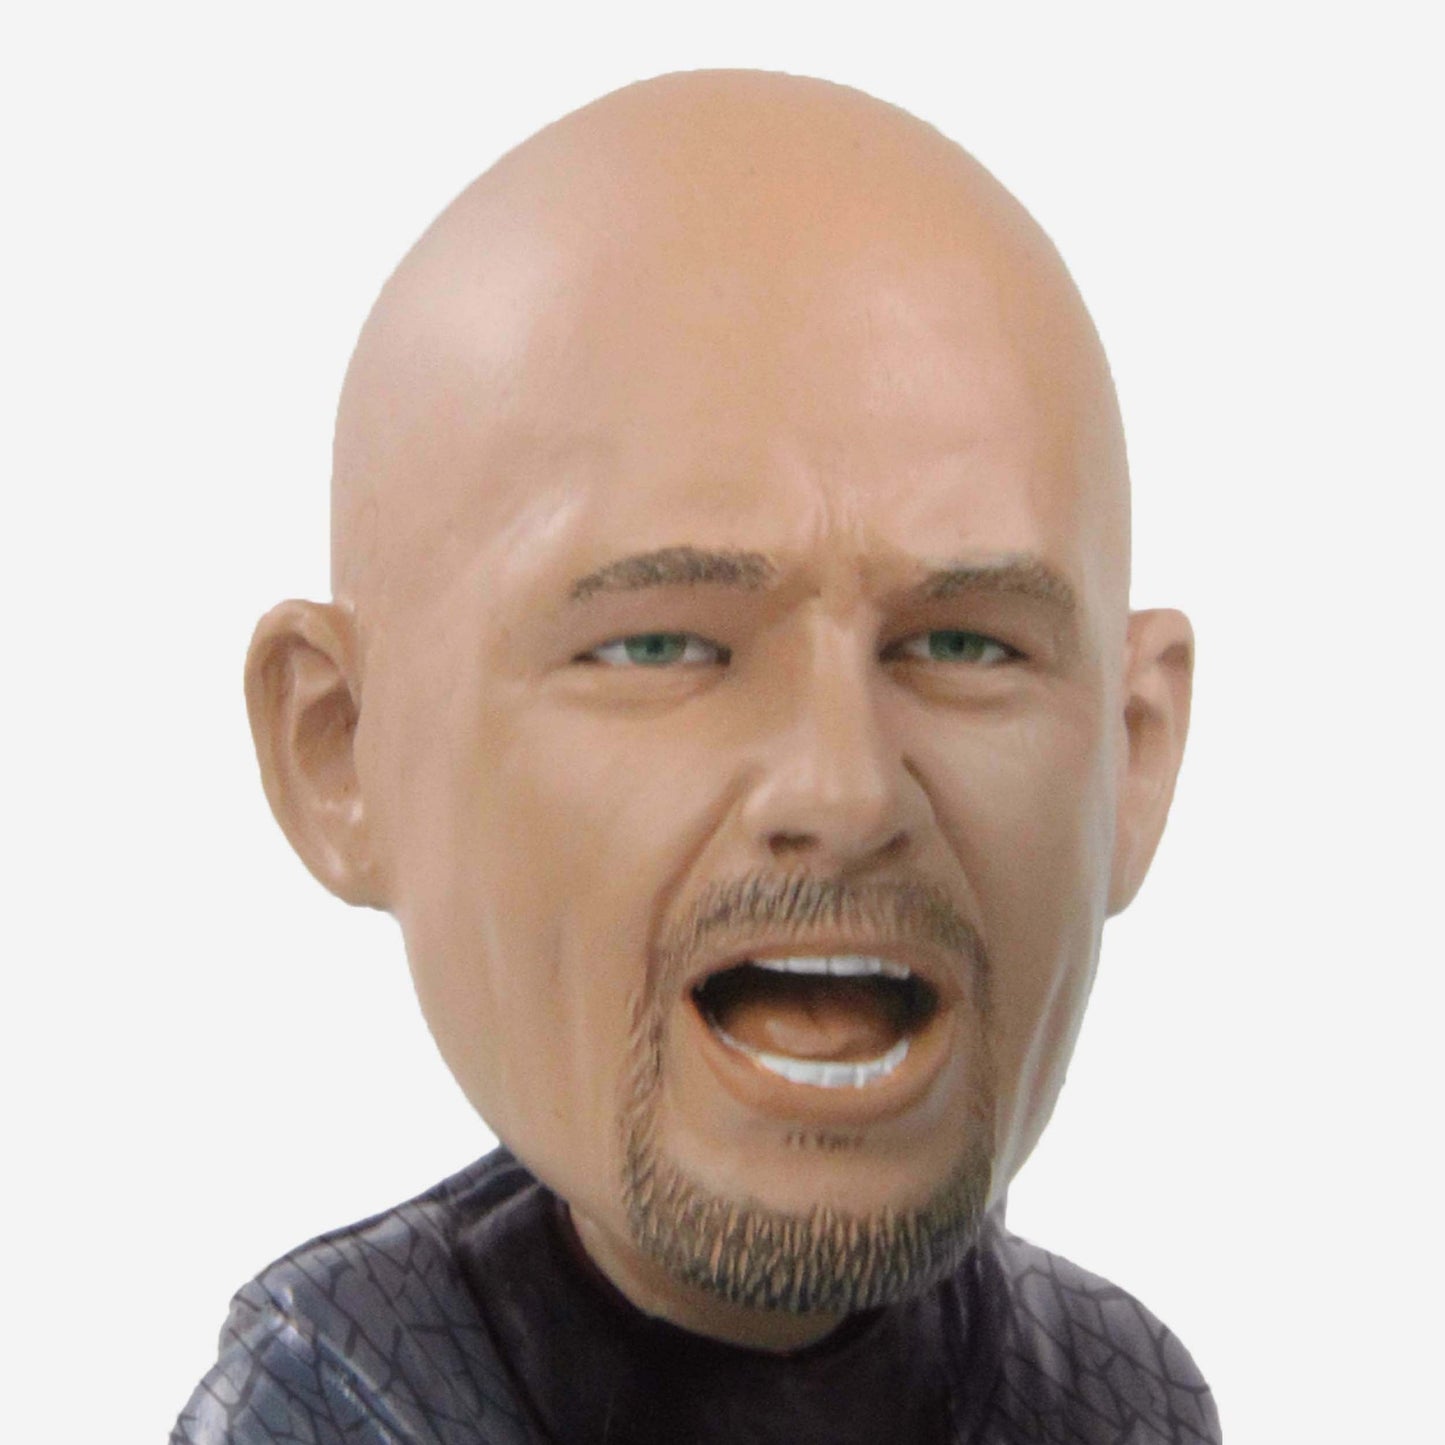 2023 WWE FOCO Bobbleheads Limited Edition Stone Cold Steve Austin vs. The Rock